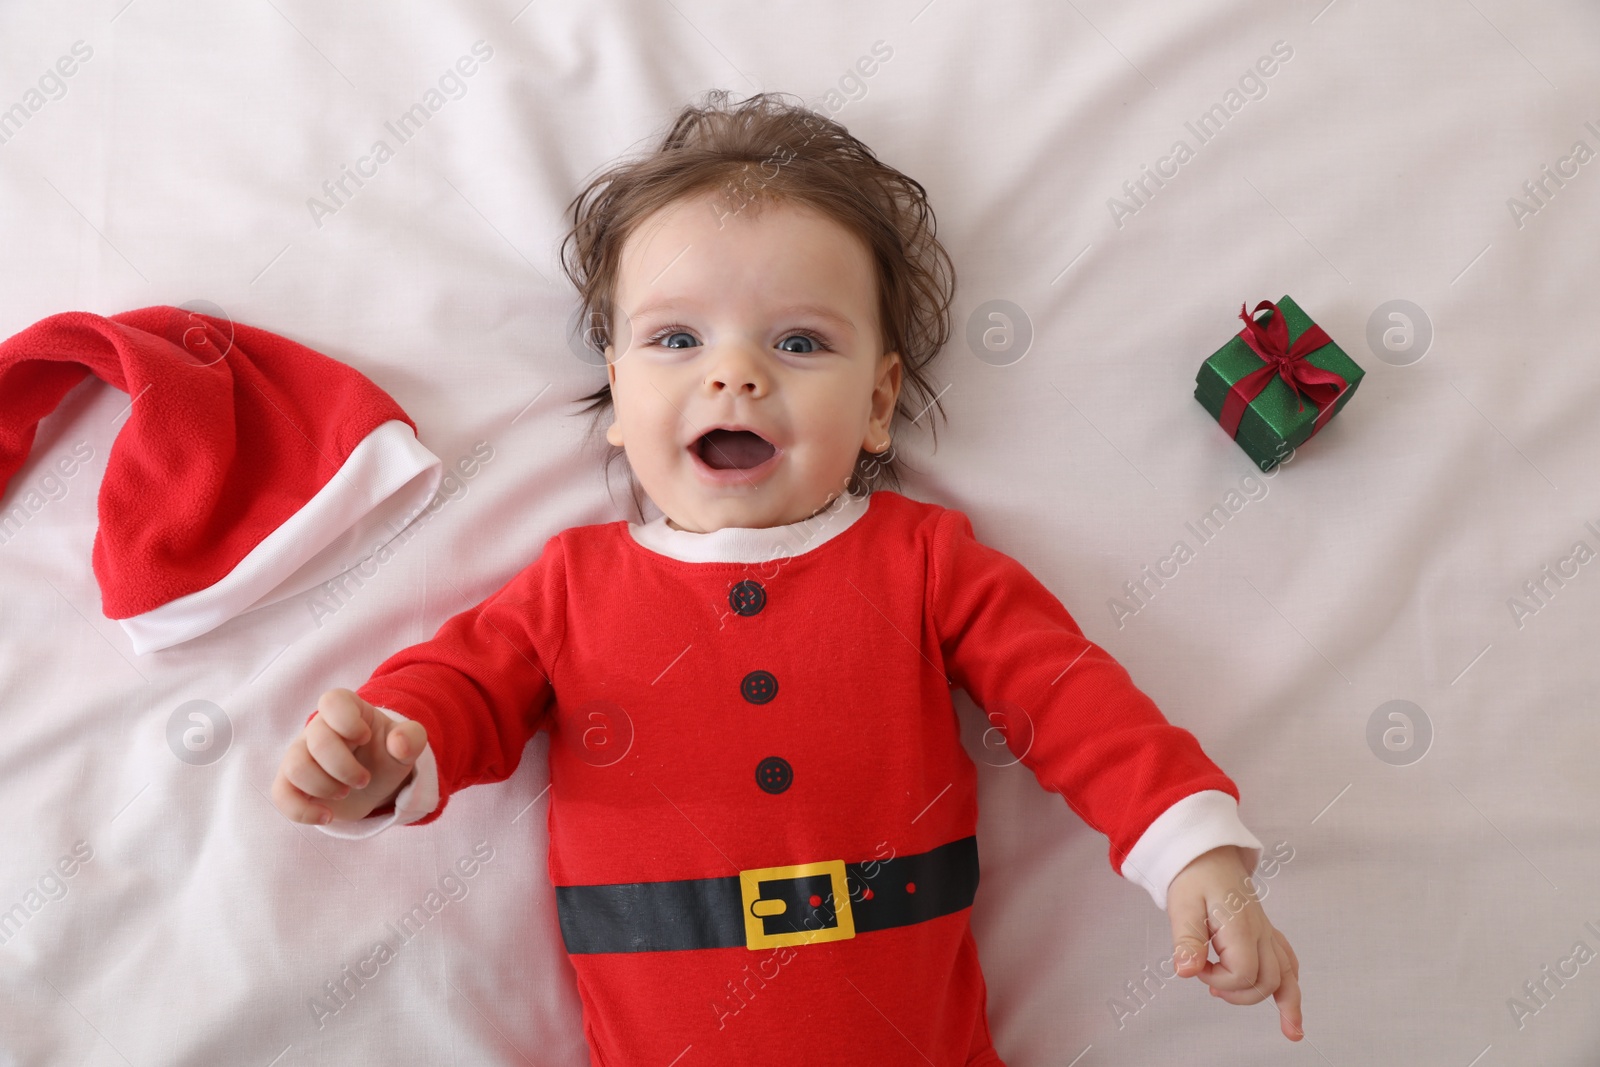 Photo of Cute baby wearing festive Christmas costume near gift box on white bedsheet, top view